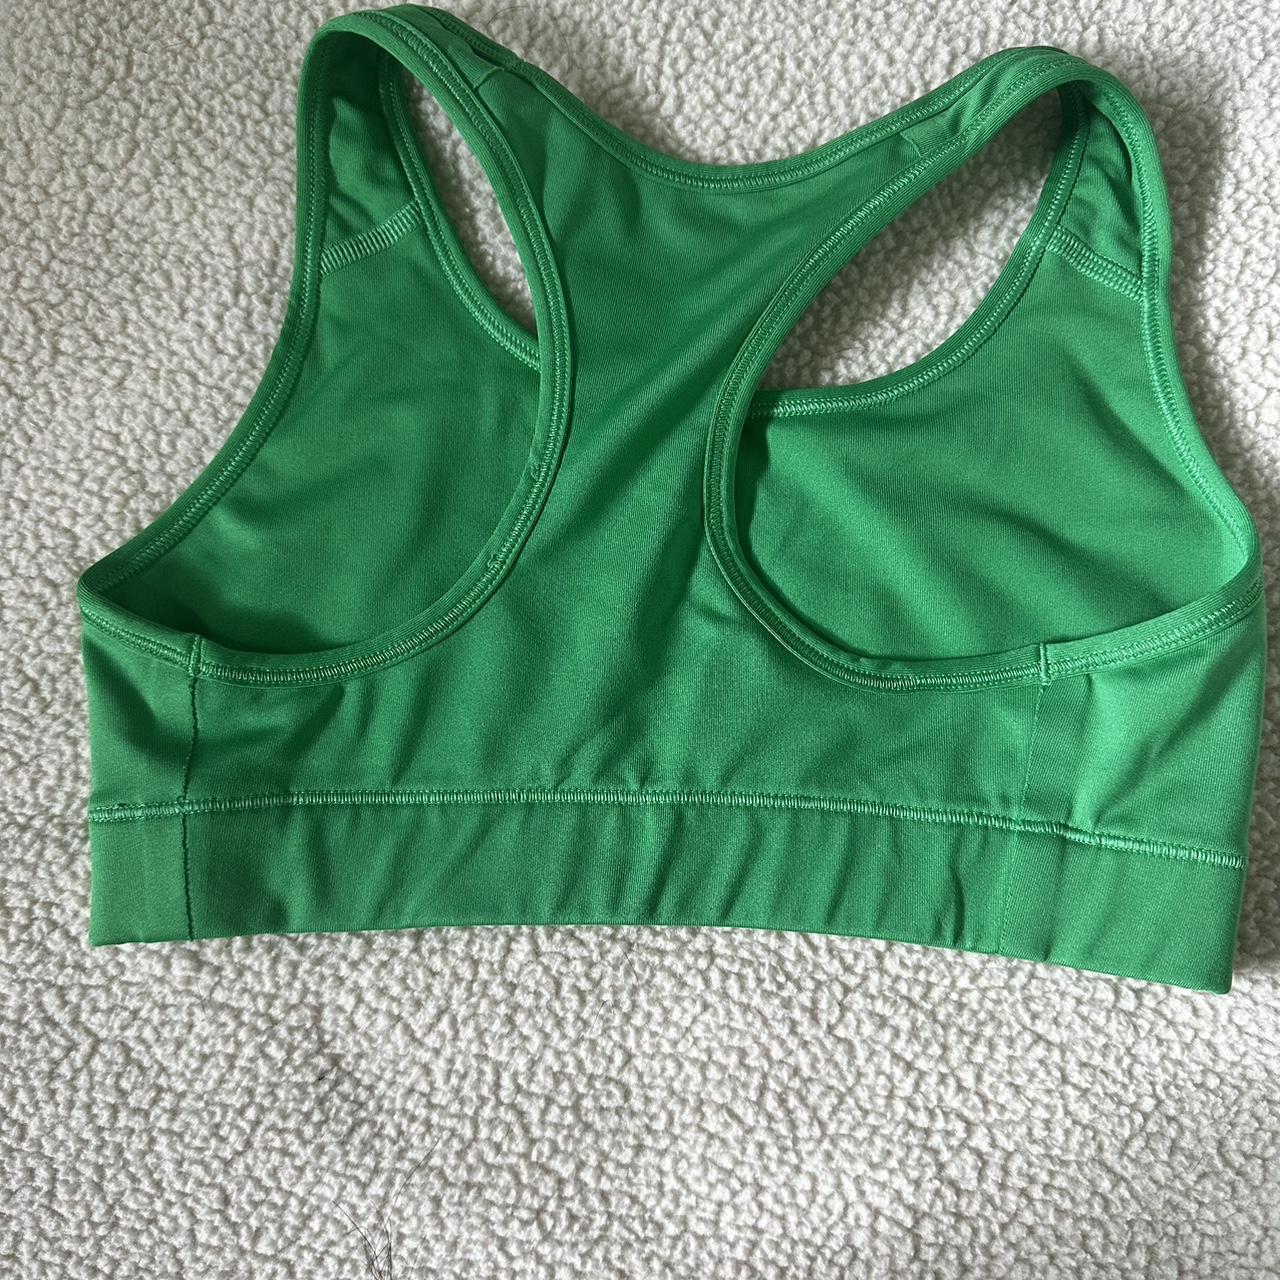 Nike Sports Bra, Great condition